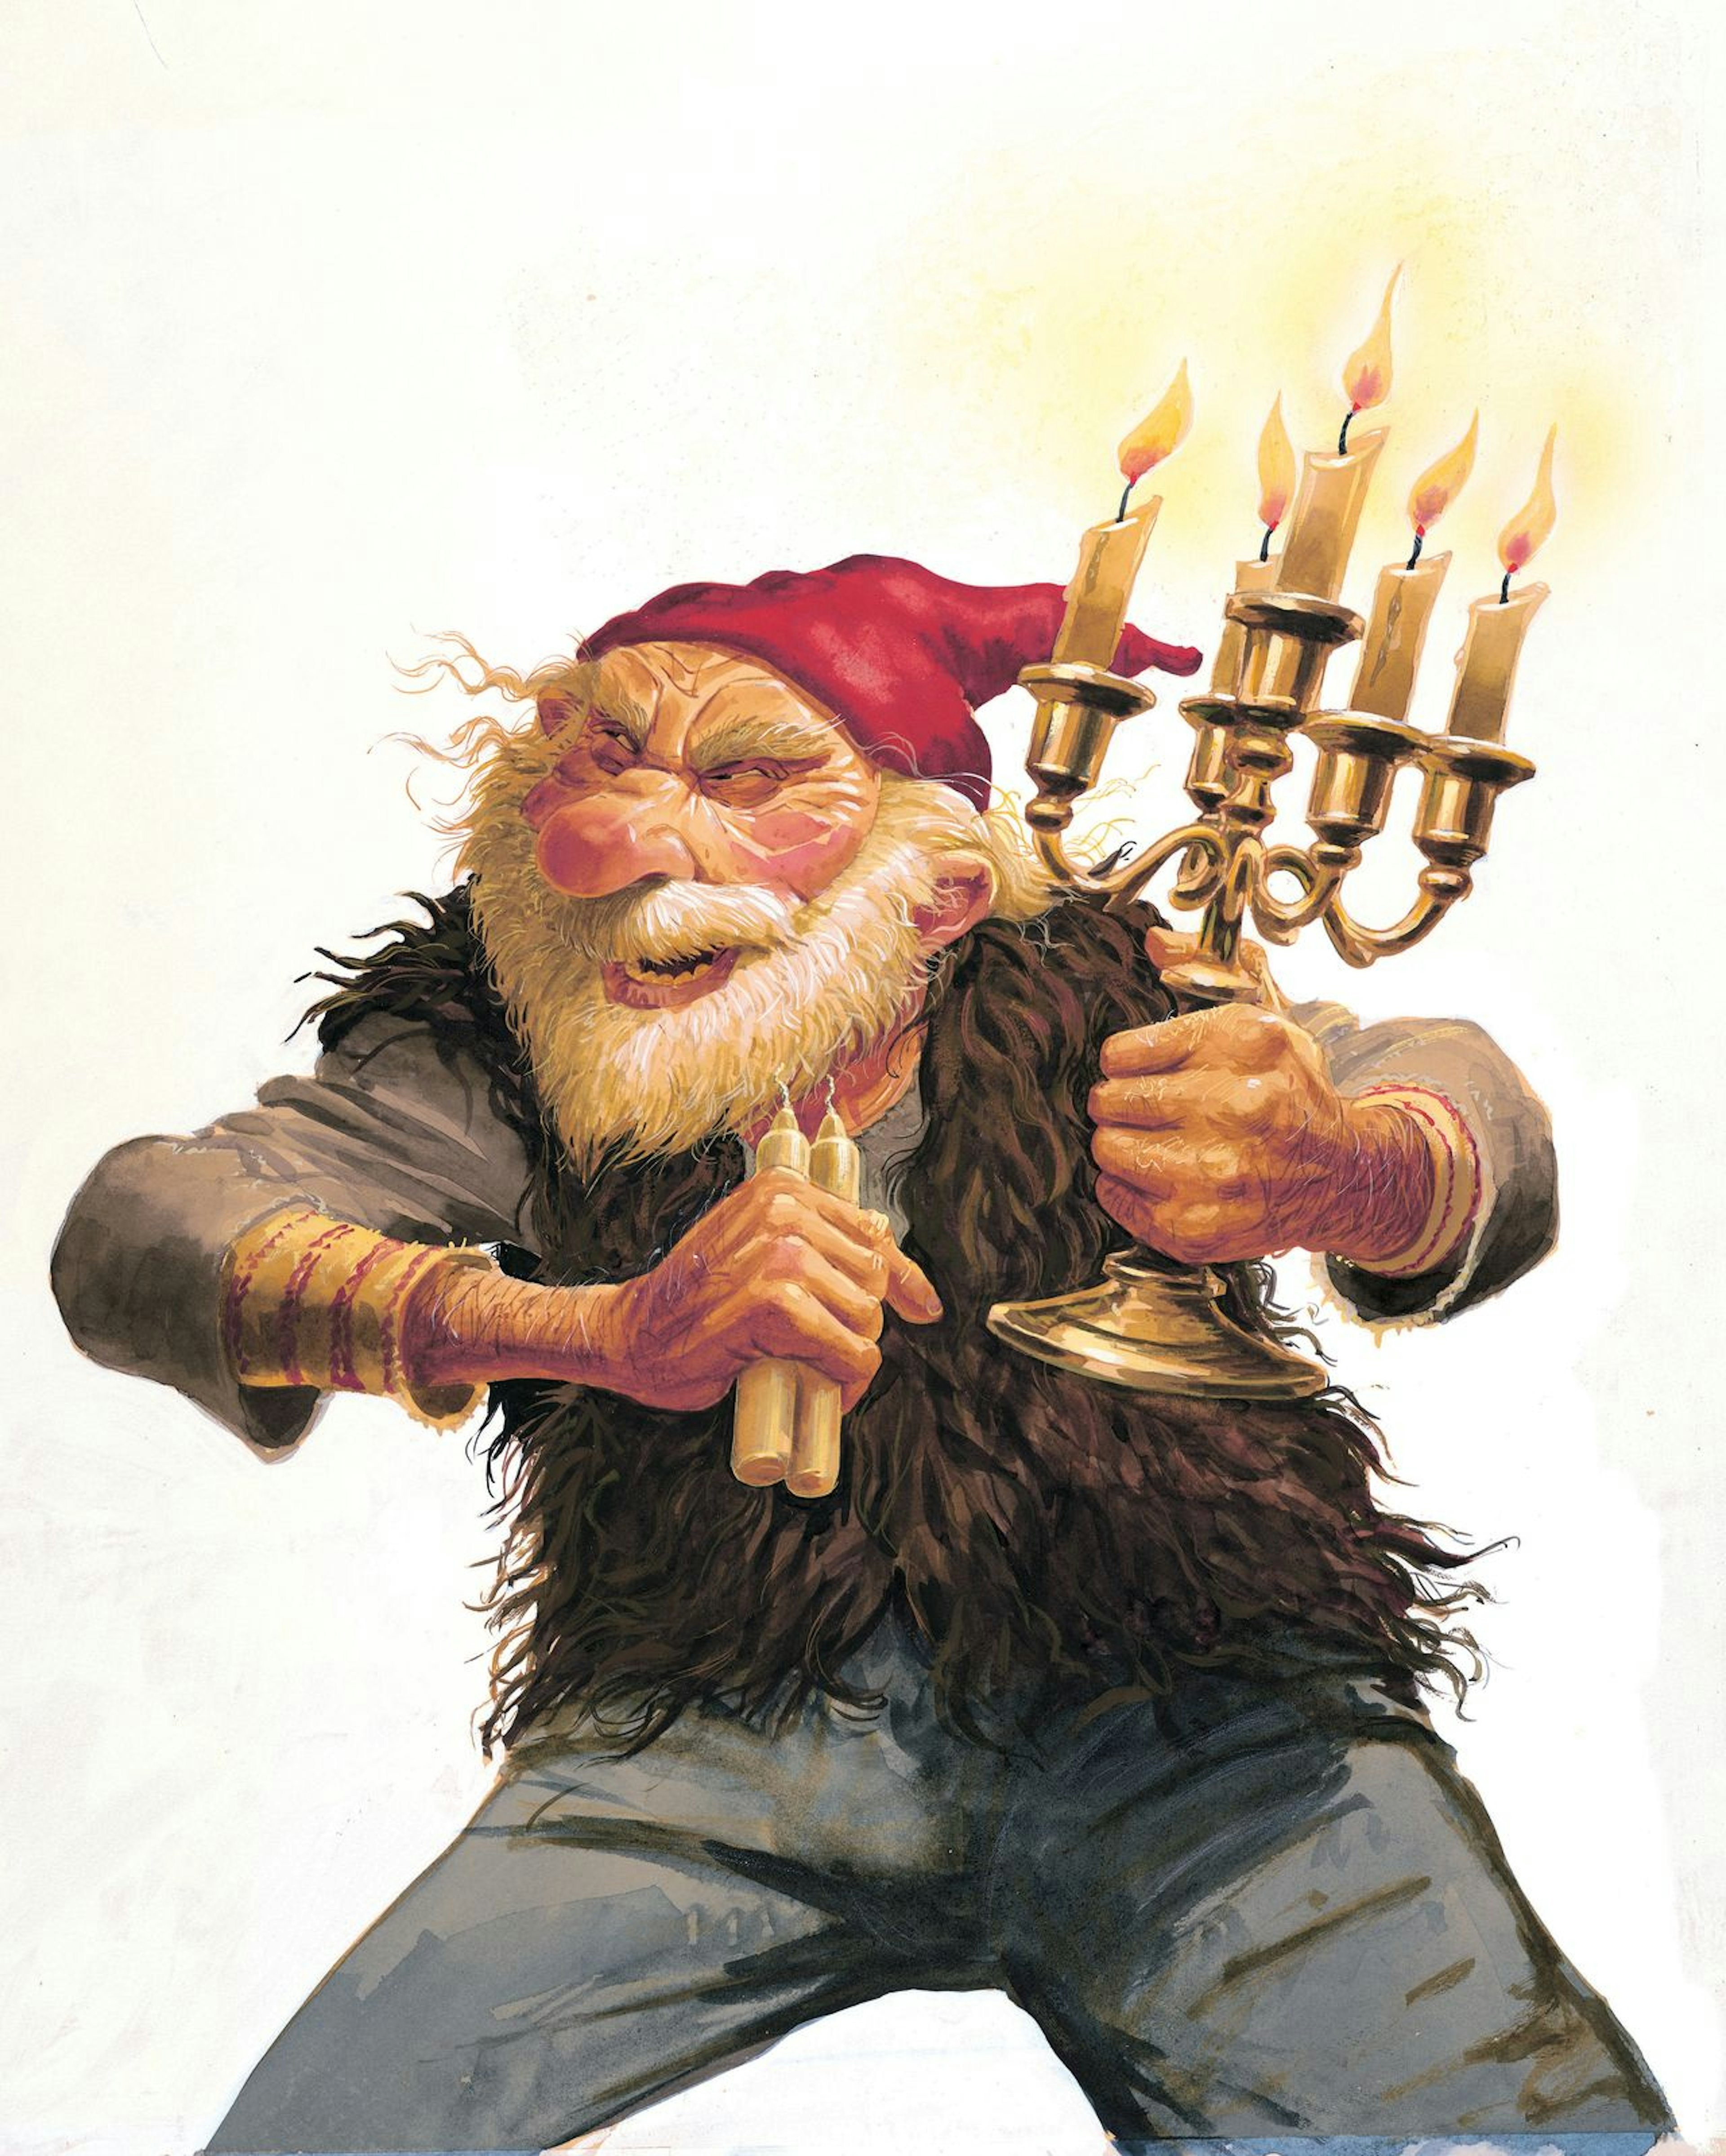 Yule Lad Kertasníkir with his candles